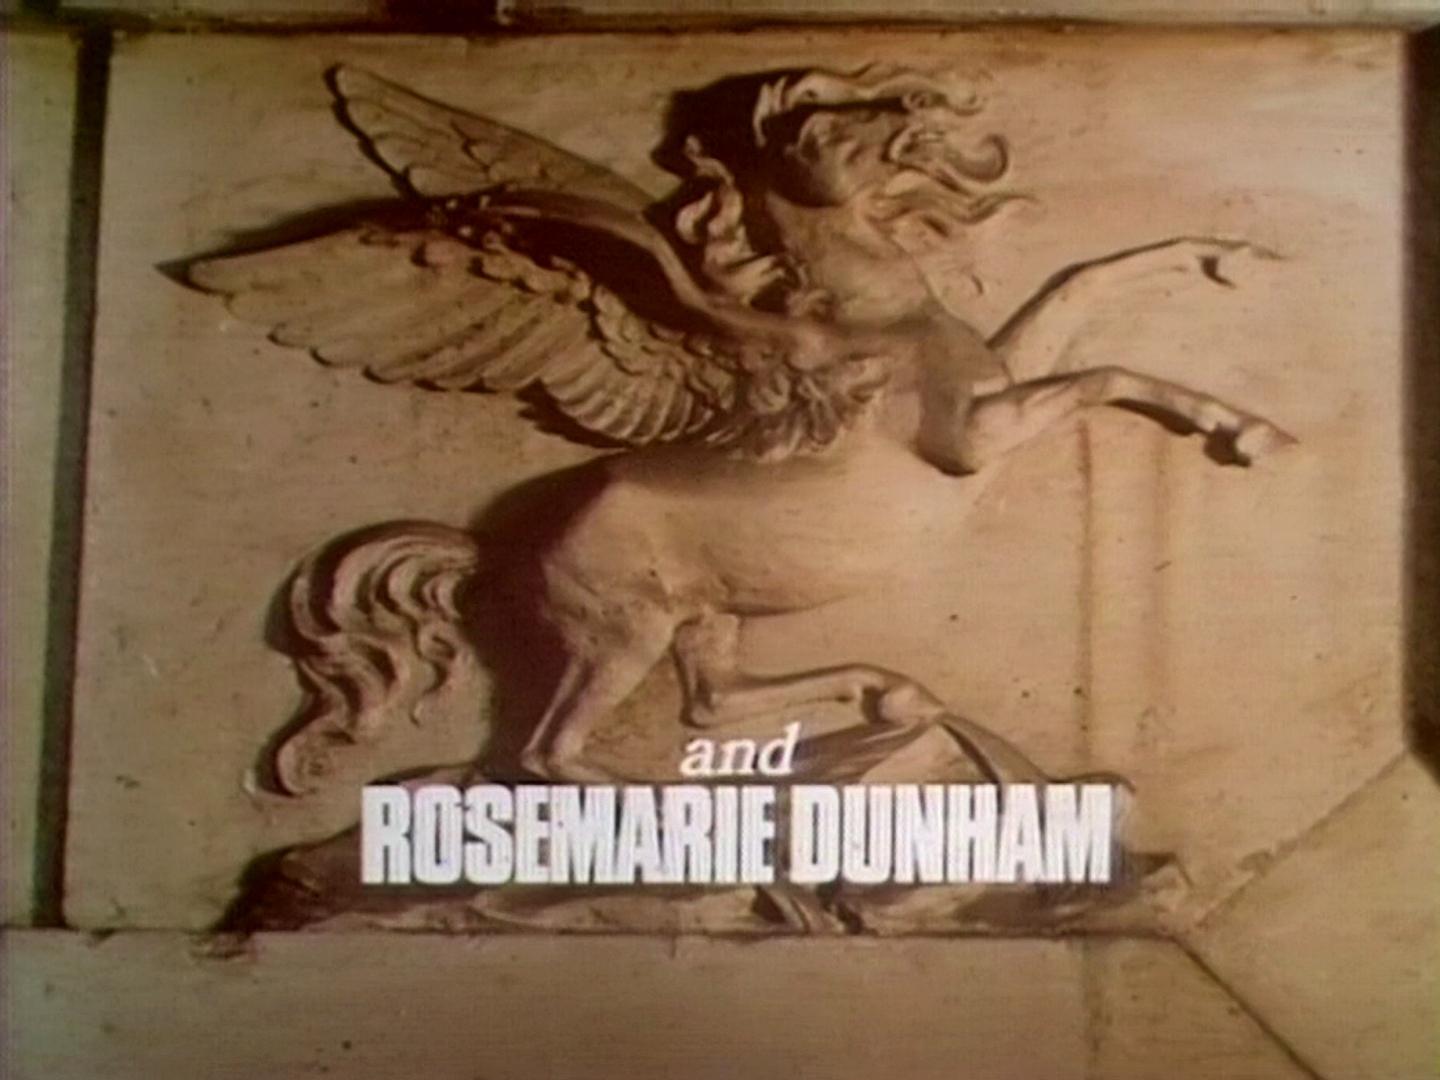 Main title from the ‘By Order of the Magistrates’ episode of Justice (1971-74) (5). And Rosemarie Dunham